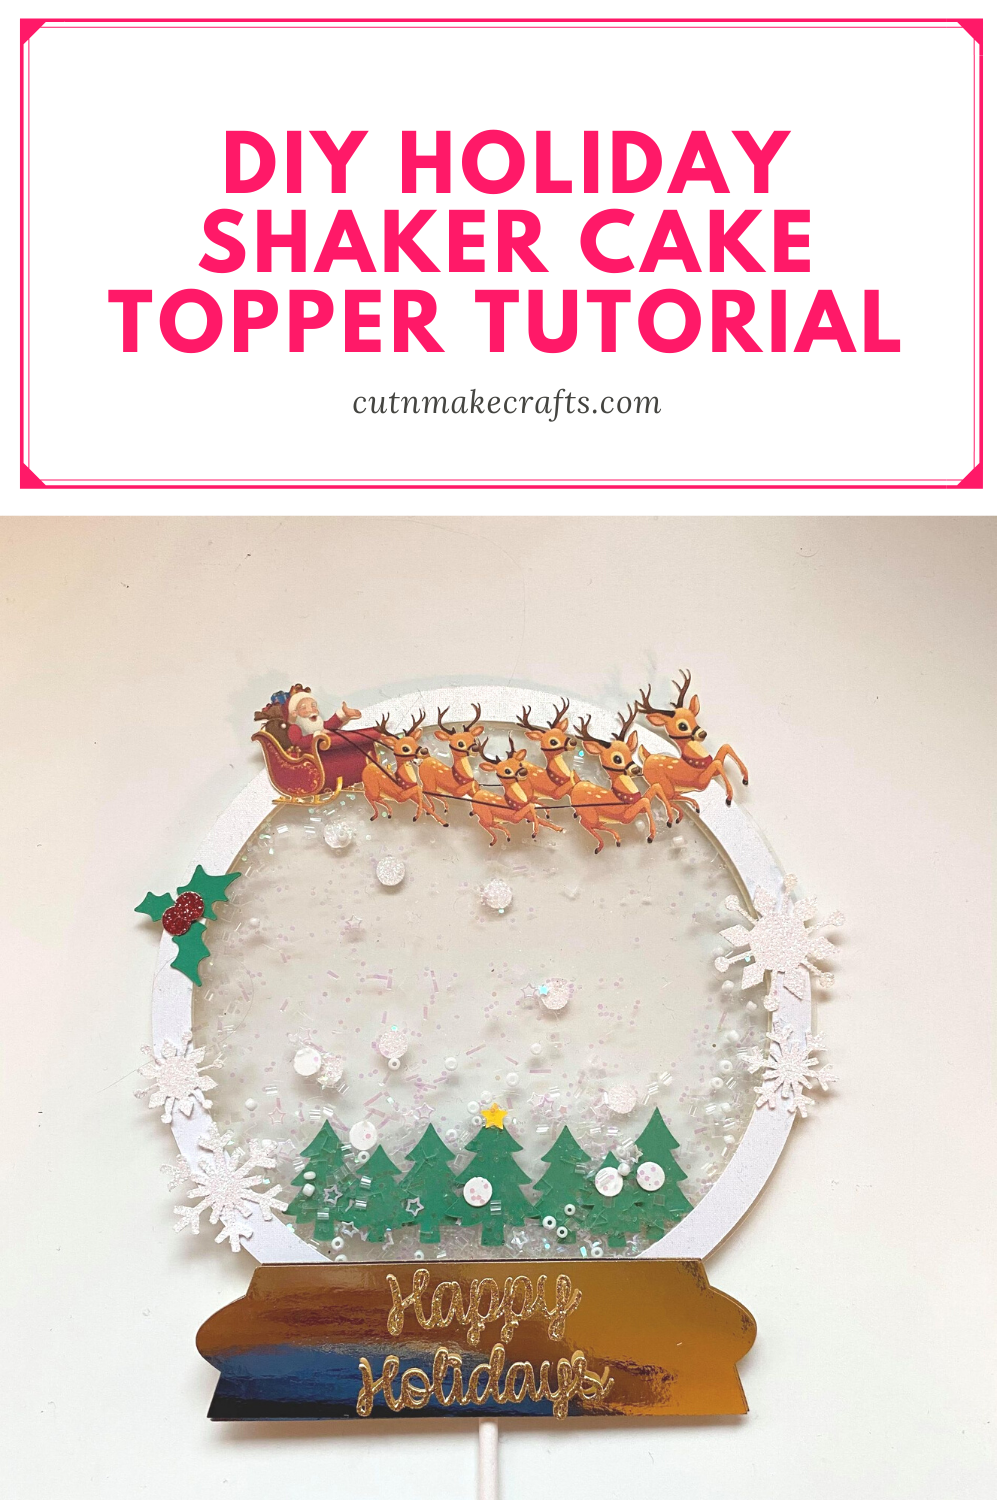 Cricut Cake Toppers: How to Make a Cake Topper with Cricut! - Leap